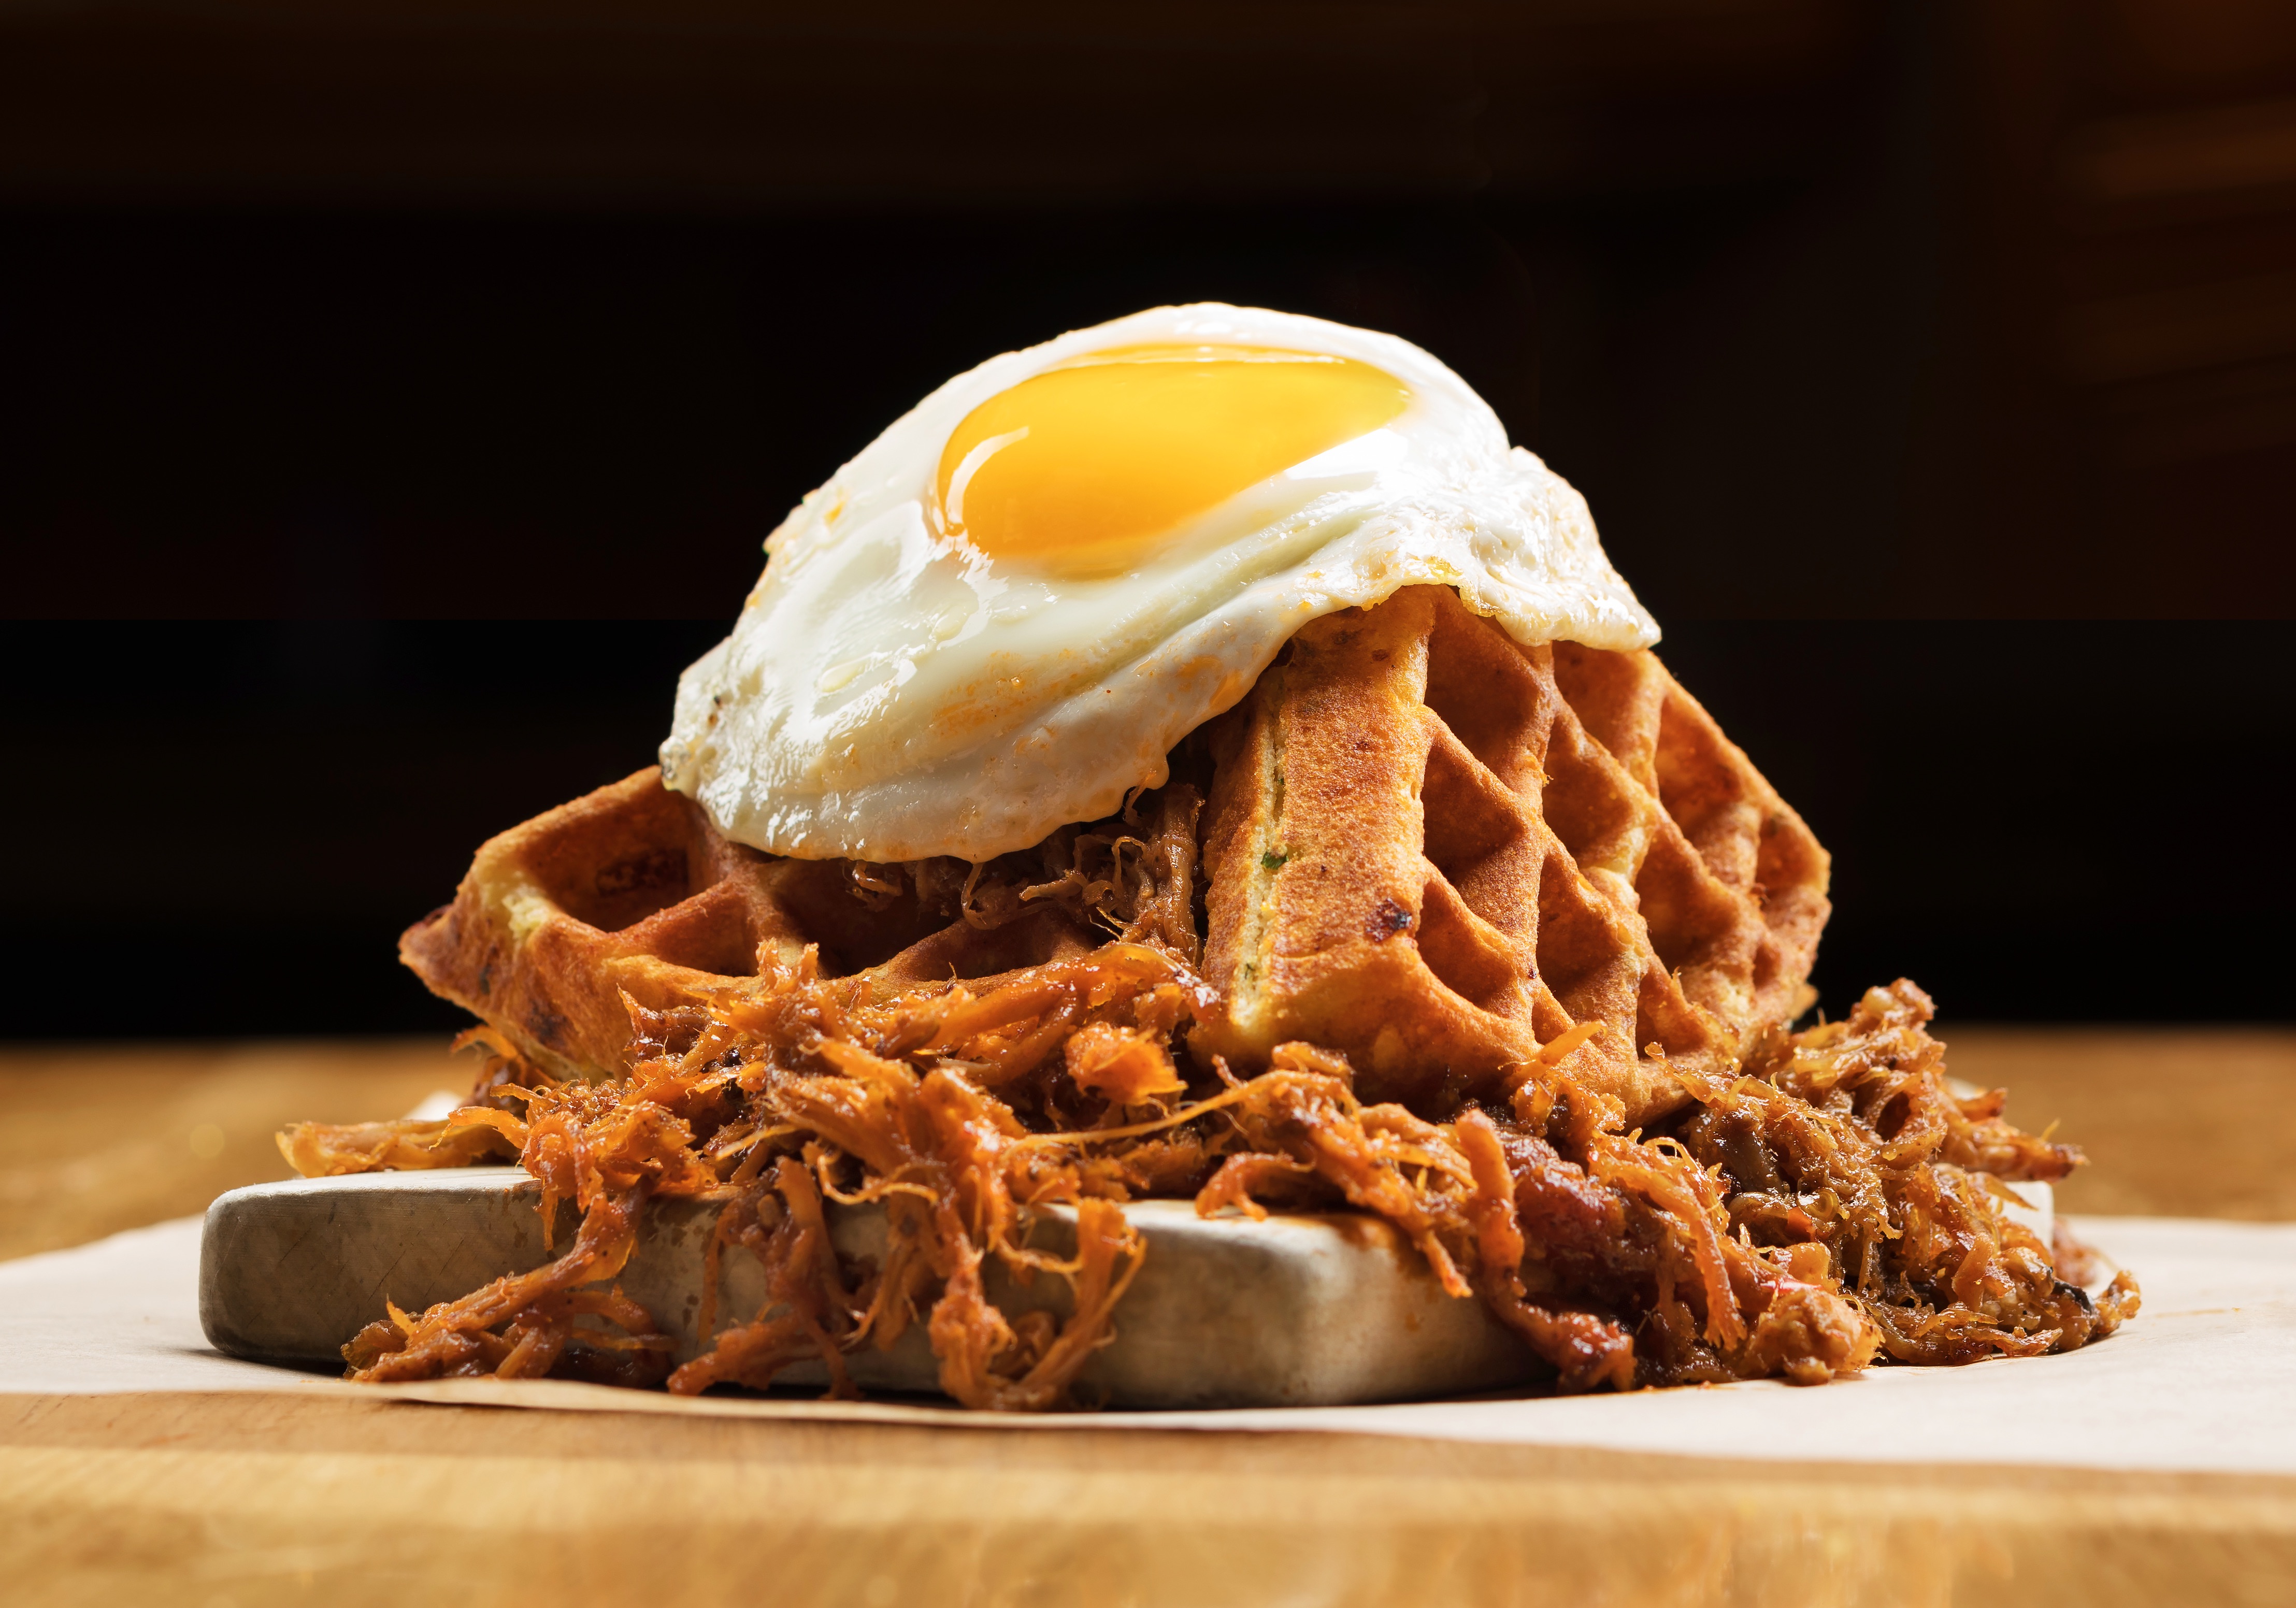 The pig and the waffle at Pub 1842